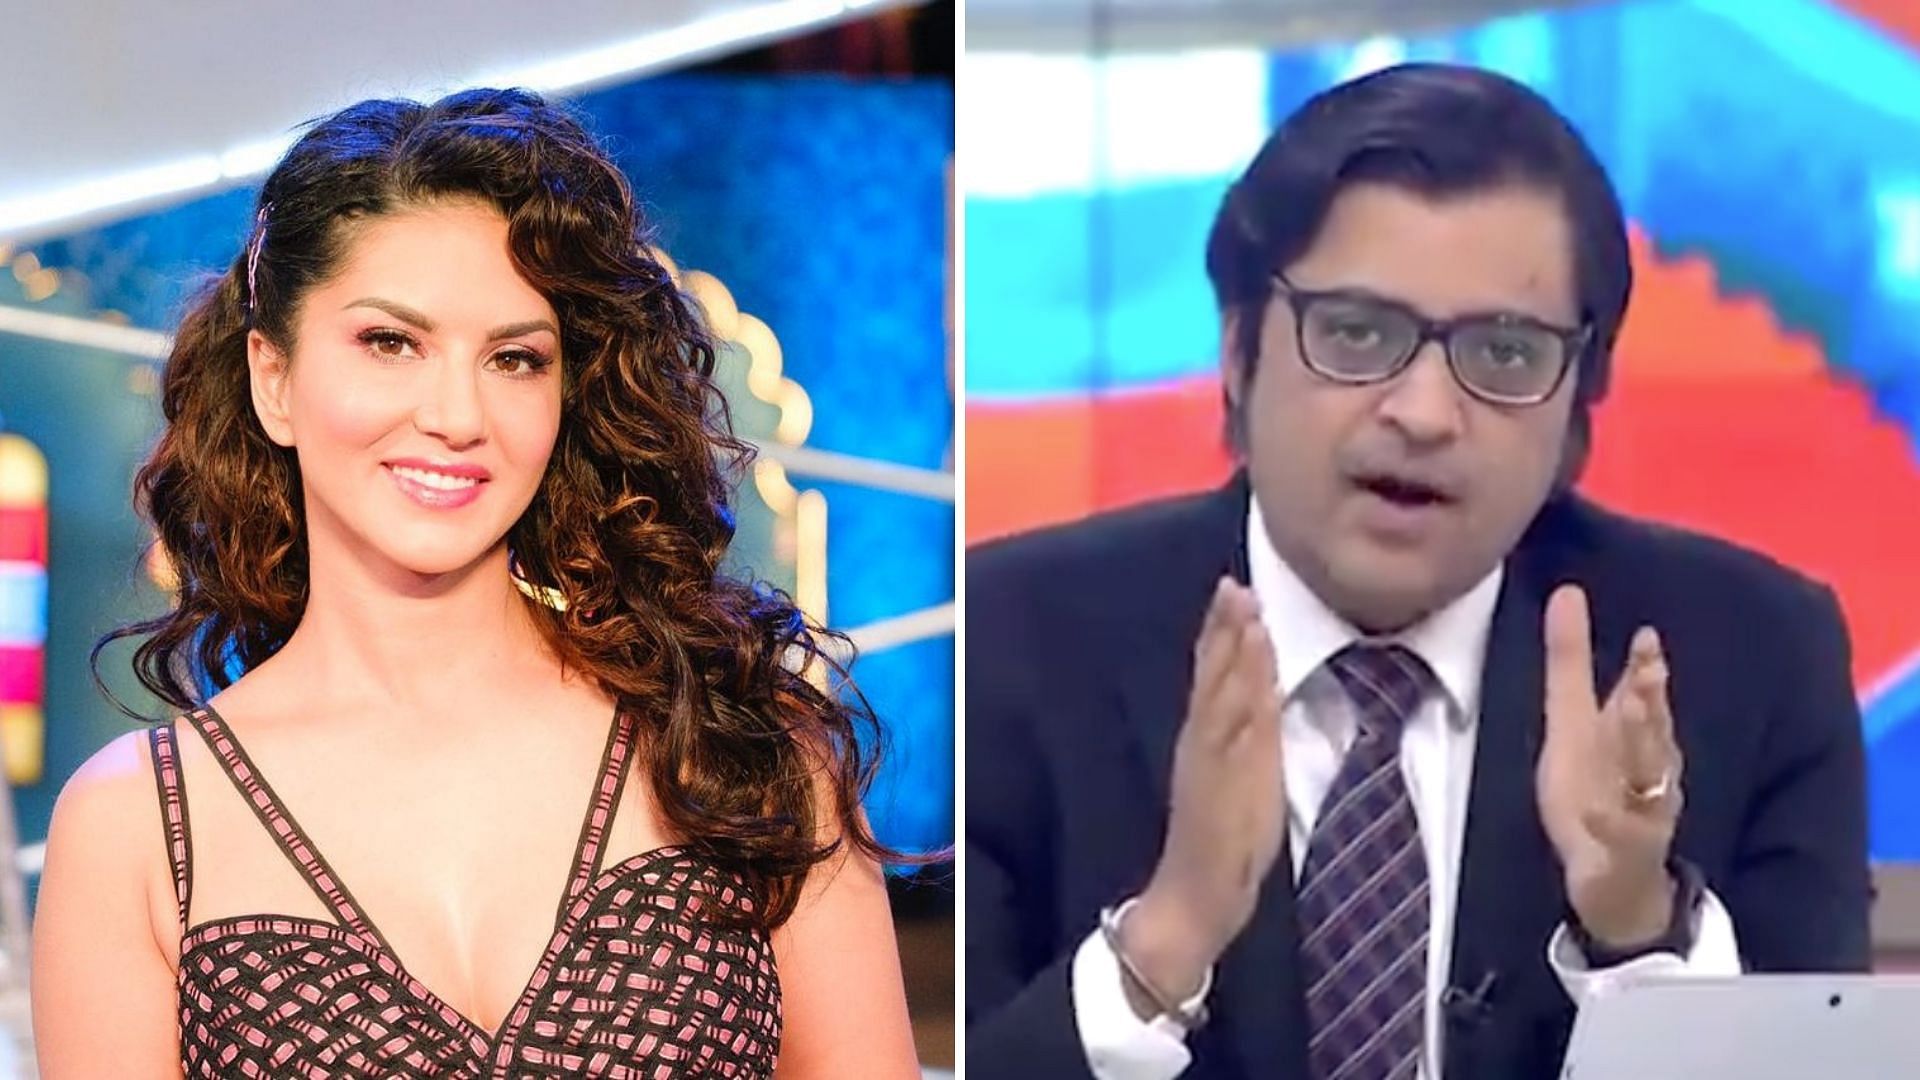 Actor Sunny Leone has responded to Arnab Goswami’s gaffe during the Lok Sabha 2019 election results.